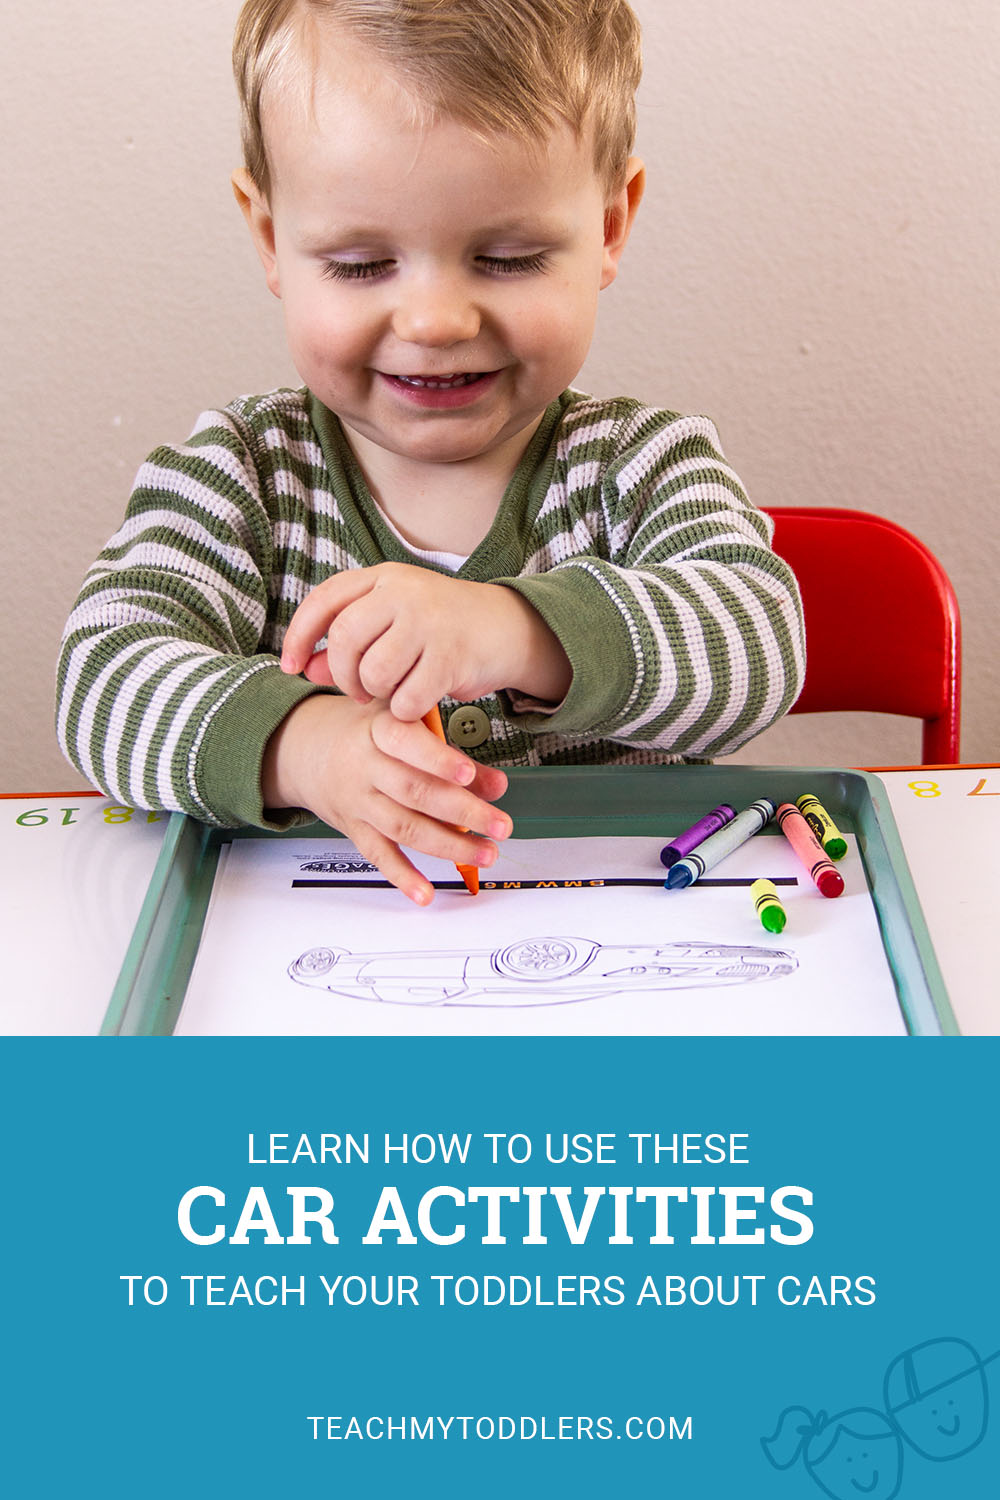 Learn how to use these car activities to teach toddlers about cars